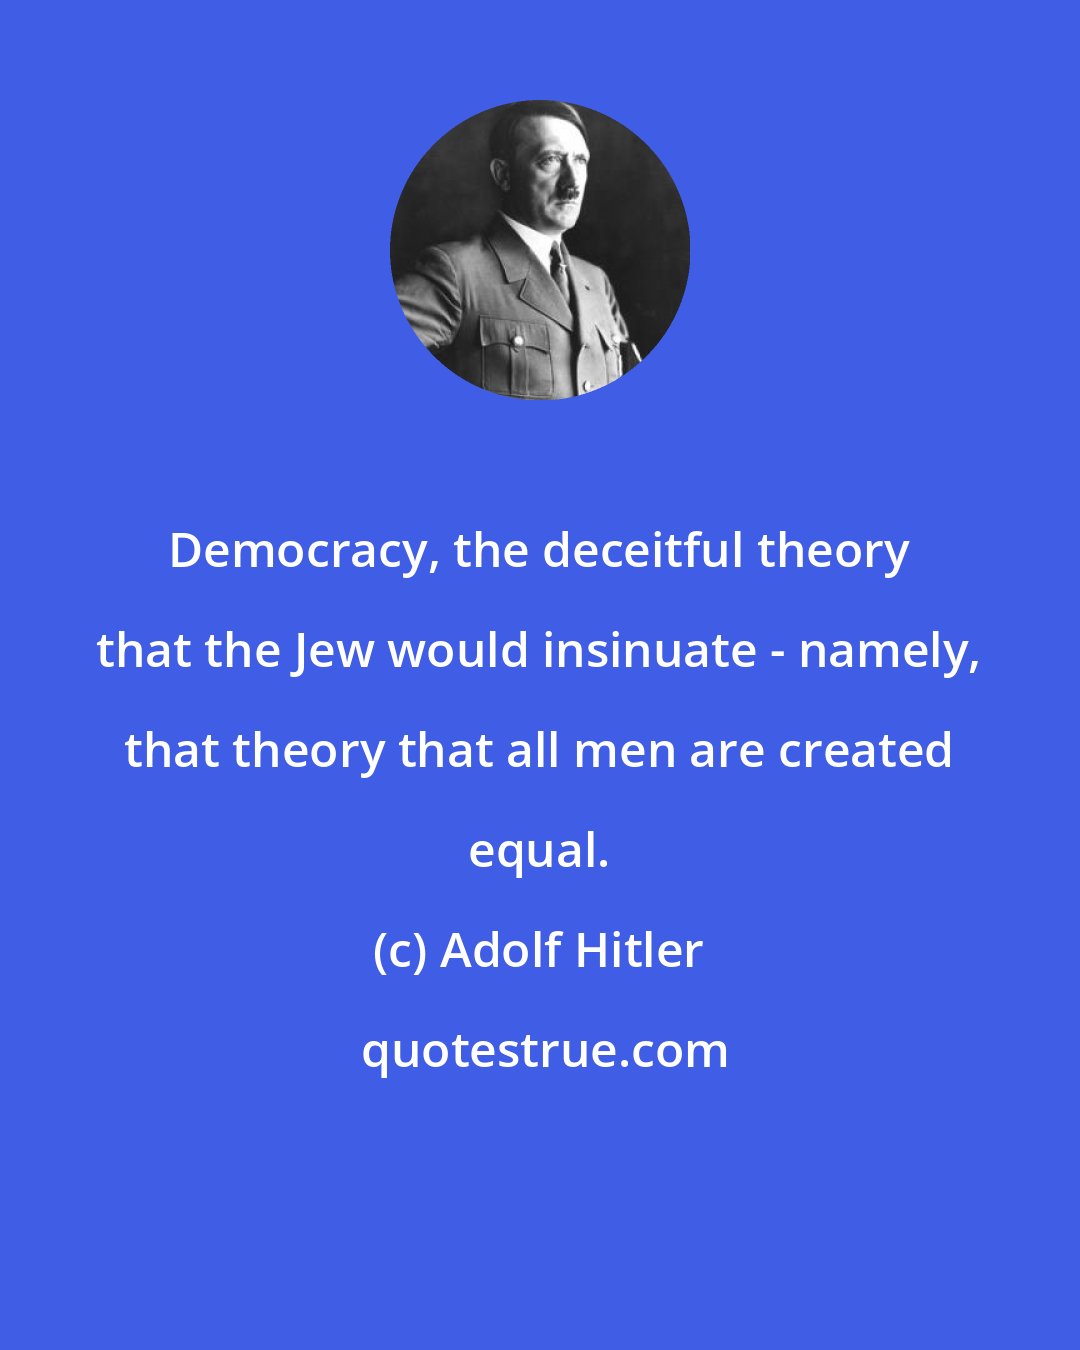 Adolf Hitler: Democracy, the deceitful theory that the Jew would insinuate - namely, that theory that all men are created equal.